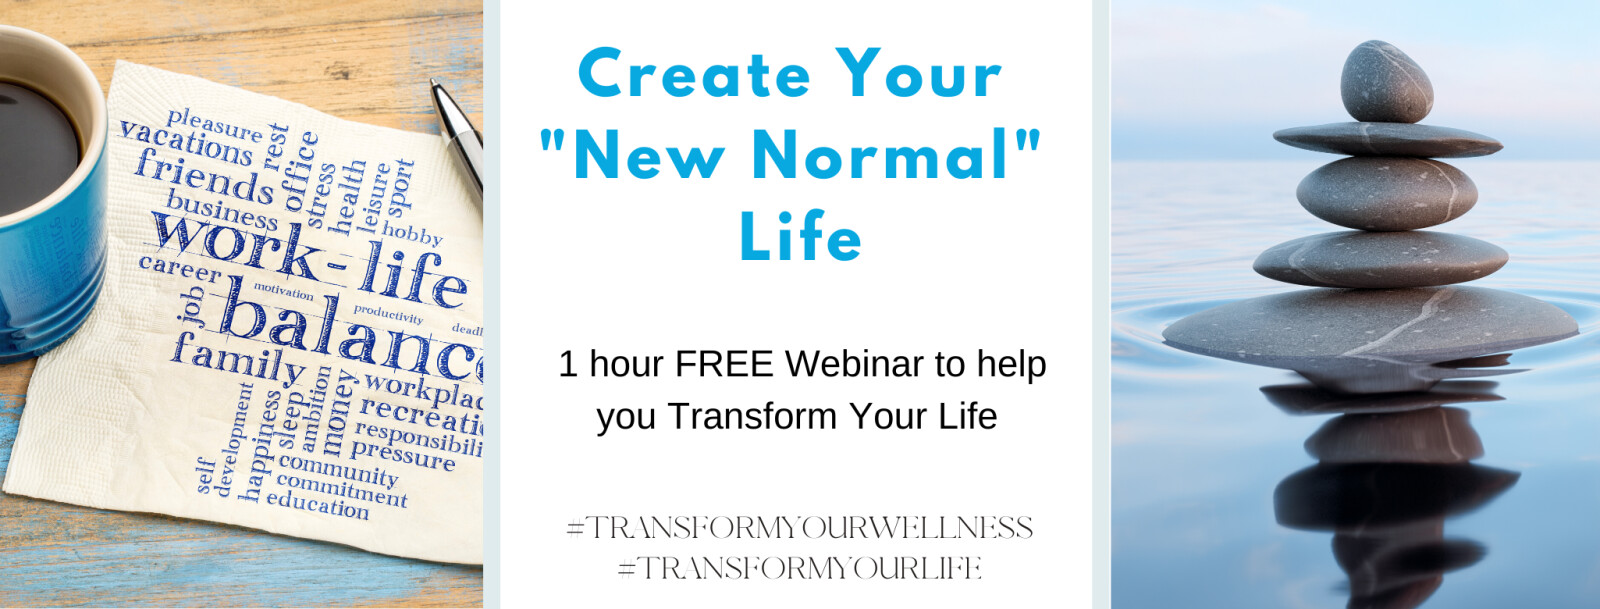 Create Your "New Normal" Life